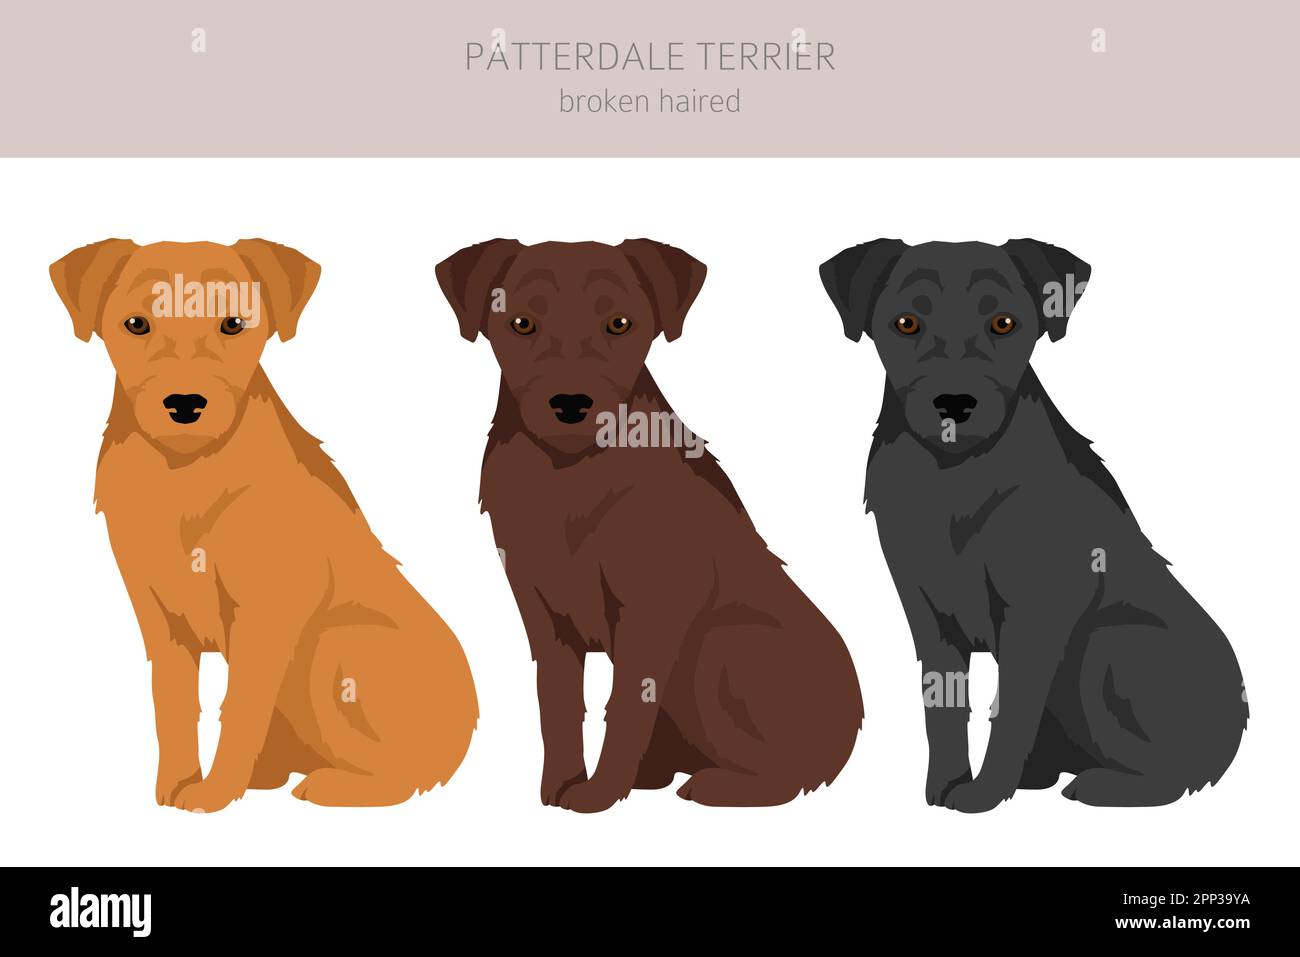 Patterdale terrier broken haired clipart. All coat colors set. All dog ...